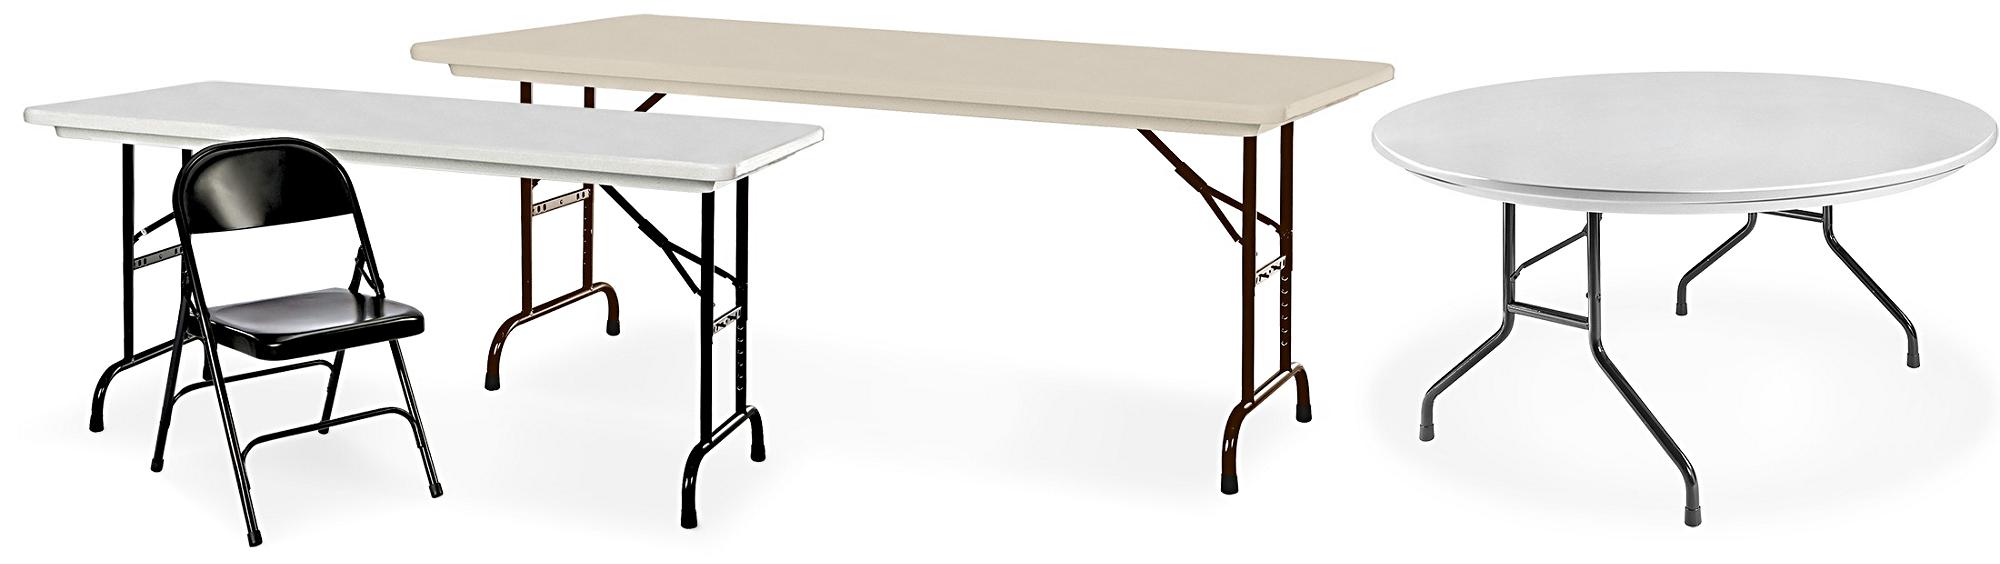 Deluxe Folding Tables